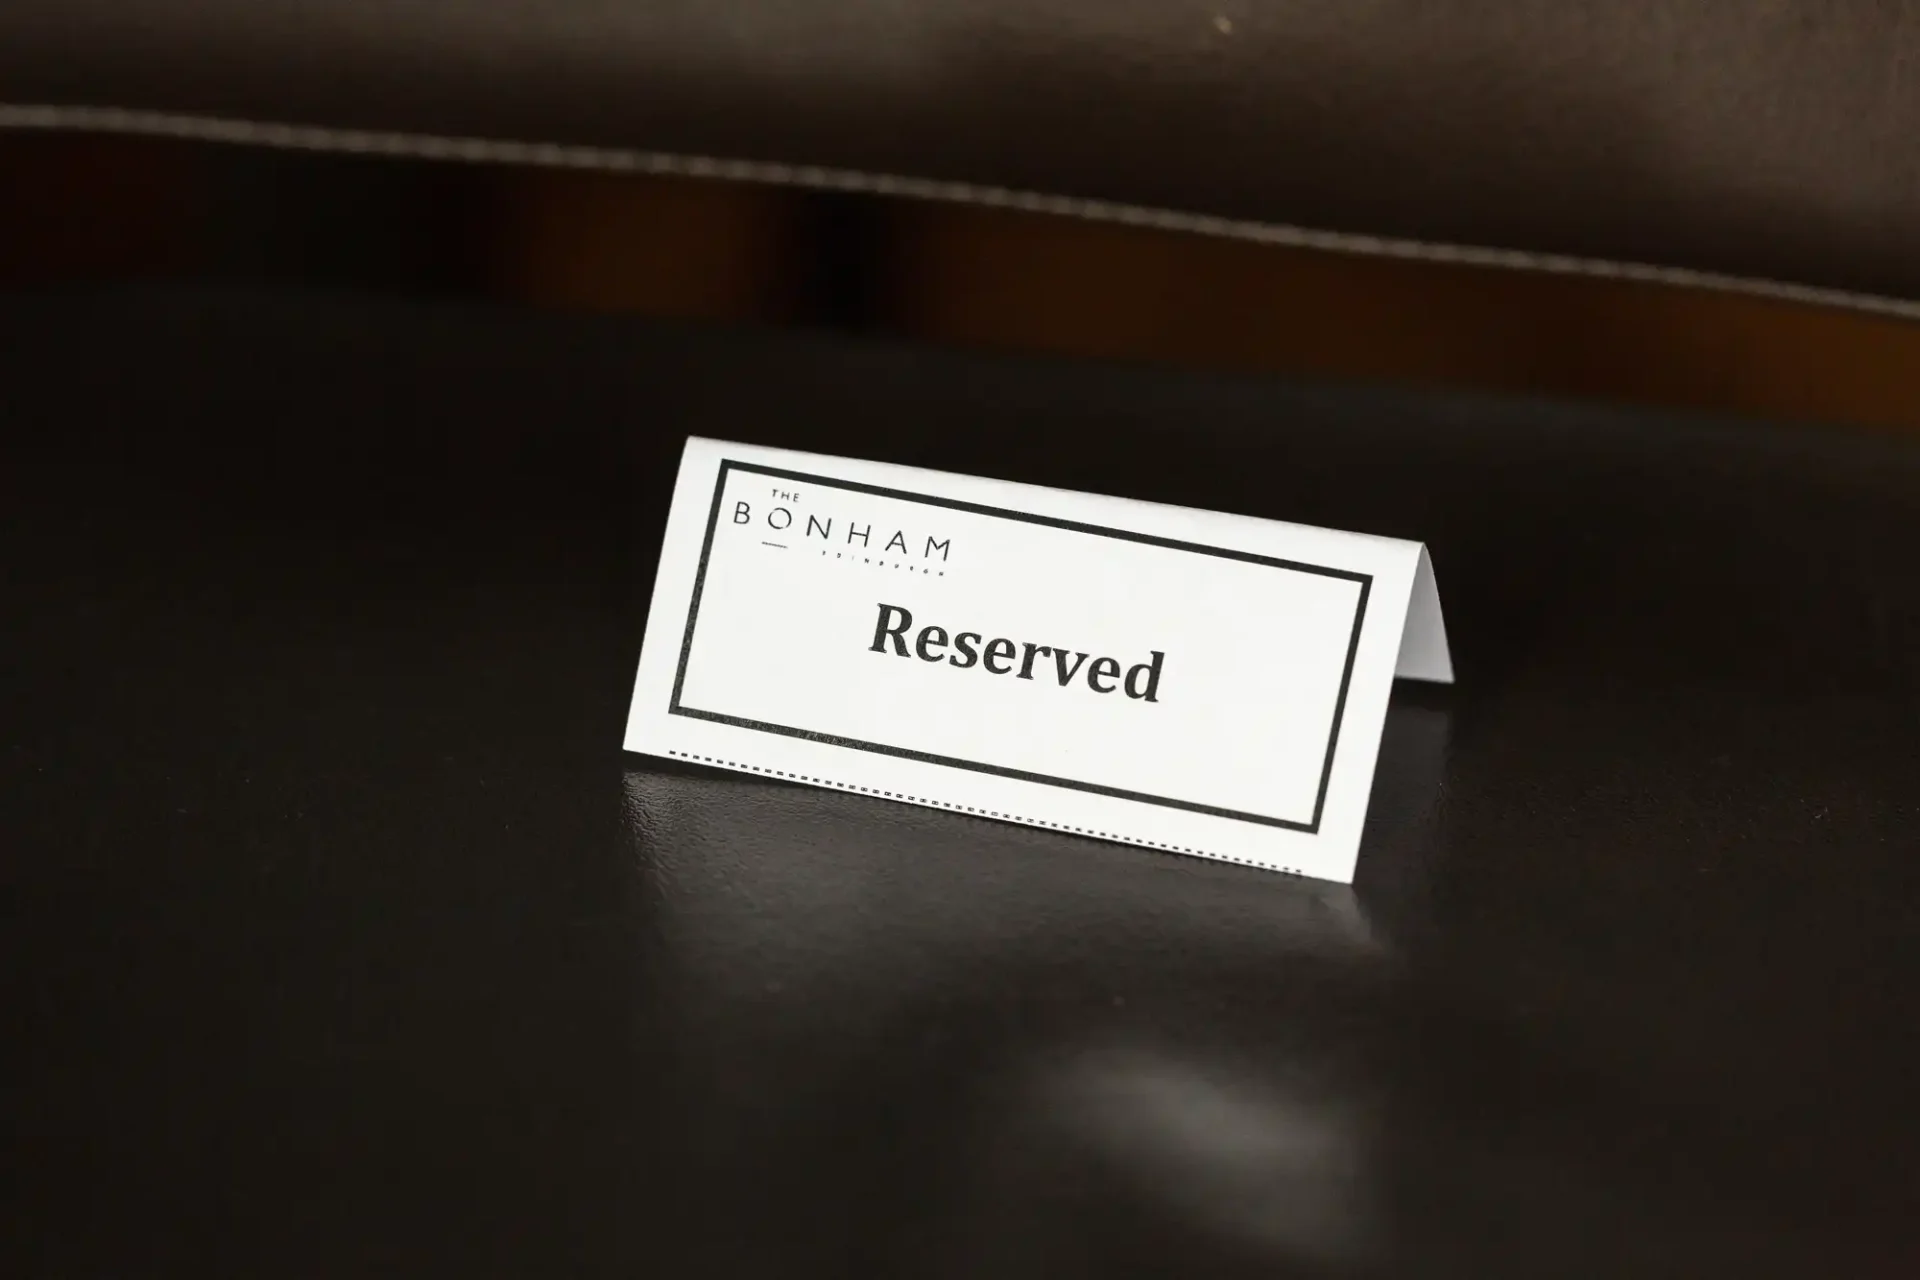 A reserved sign with the text "bonham reserved" placed on a dark, matte surface.